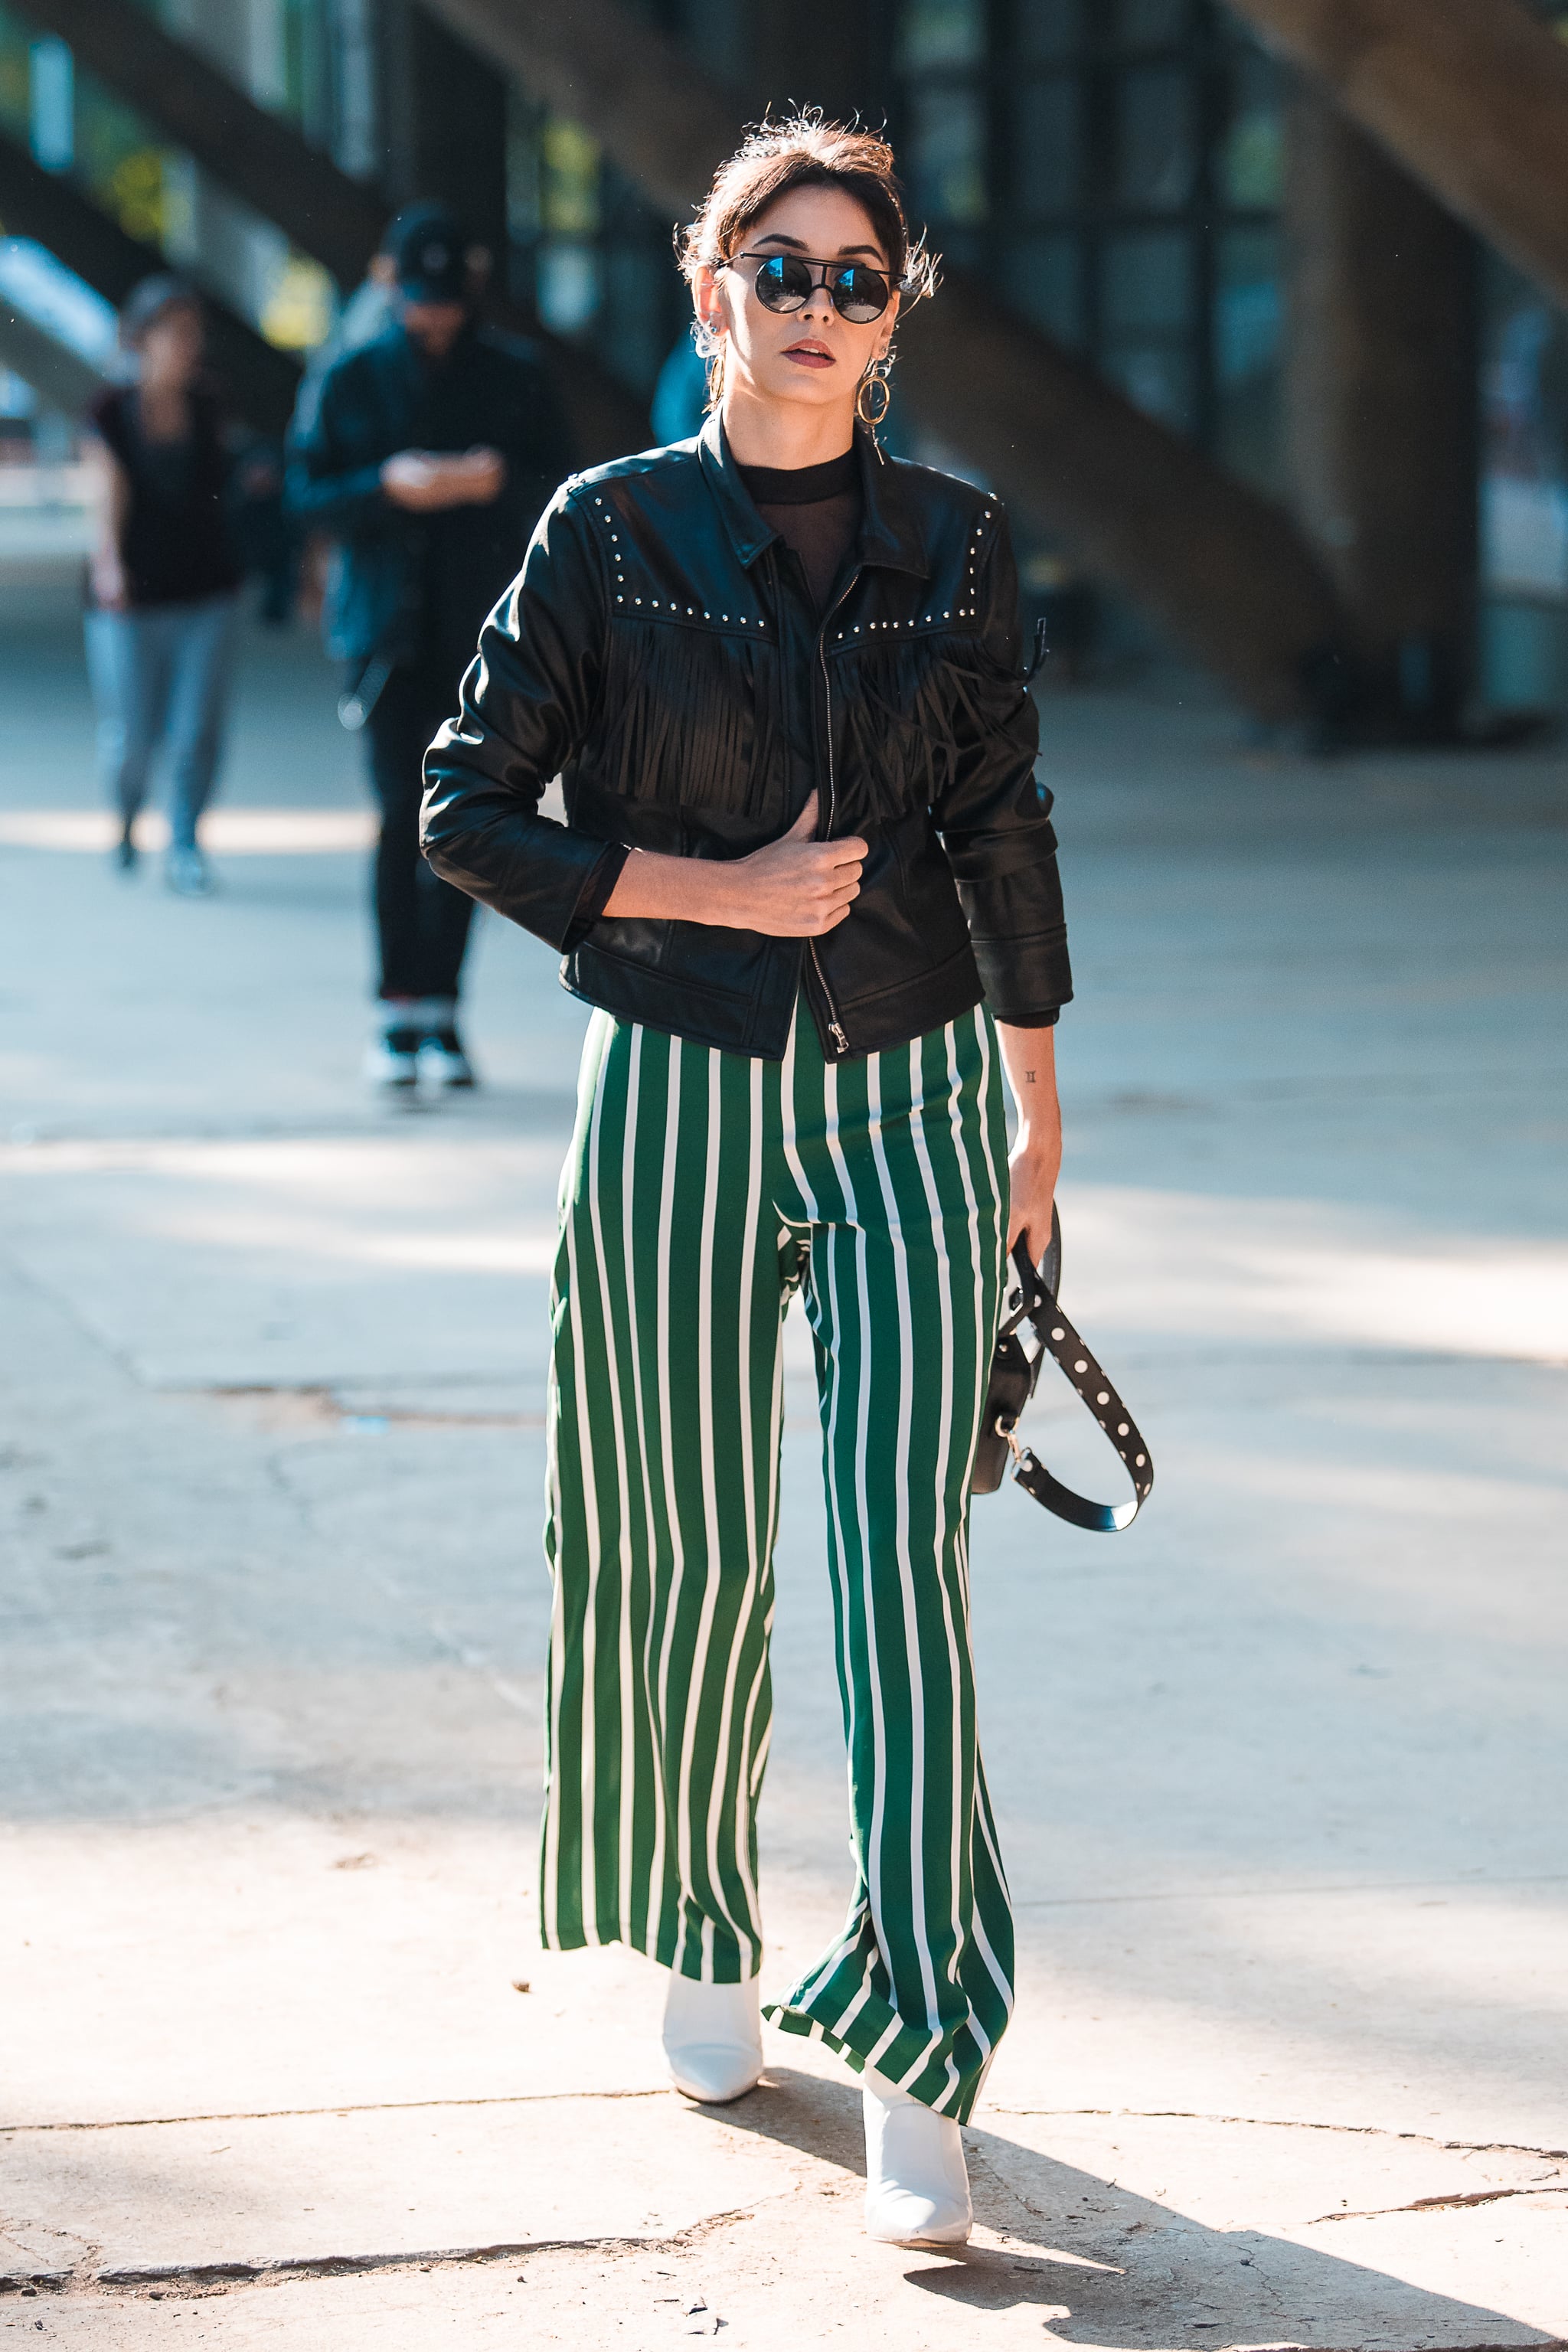 20 Trendy Ways to Style Your Wide-Leg Pants